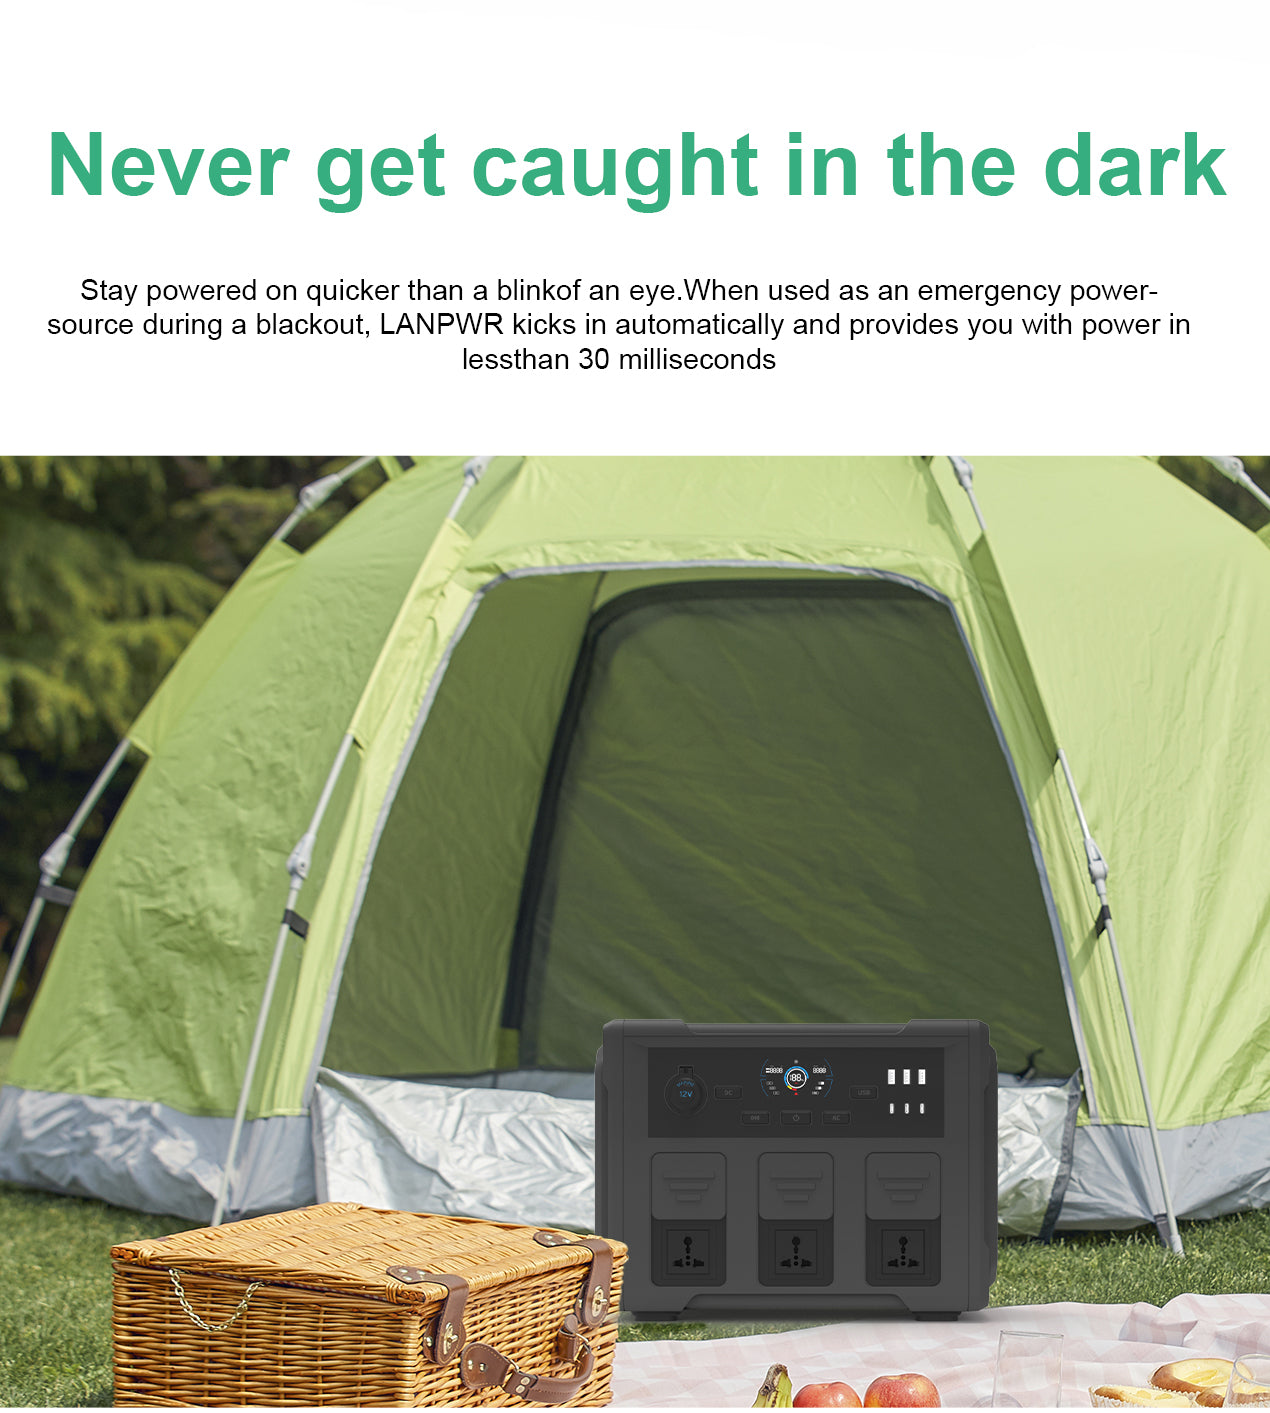 Powering Your Camping Electronics with a Portable Power Station